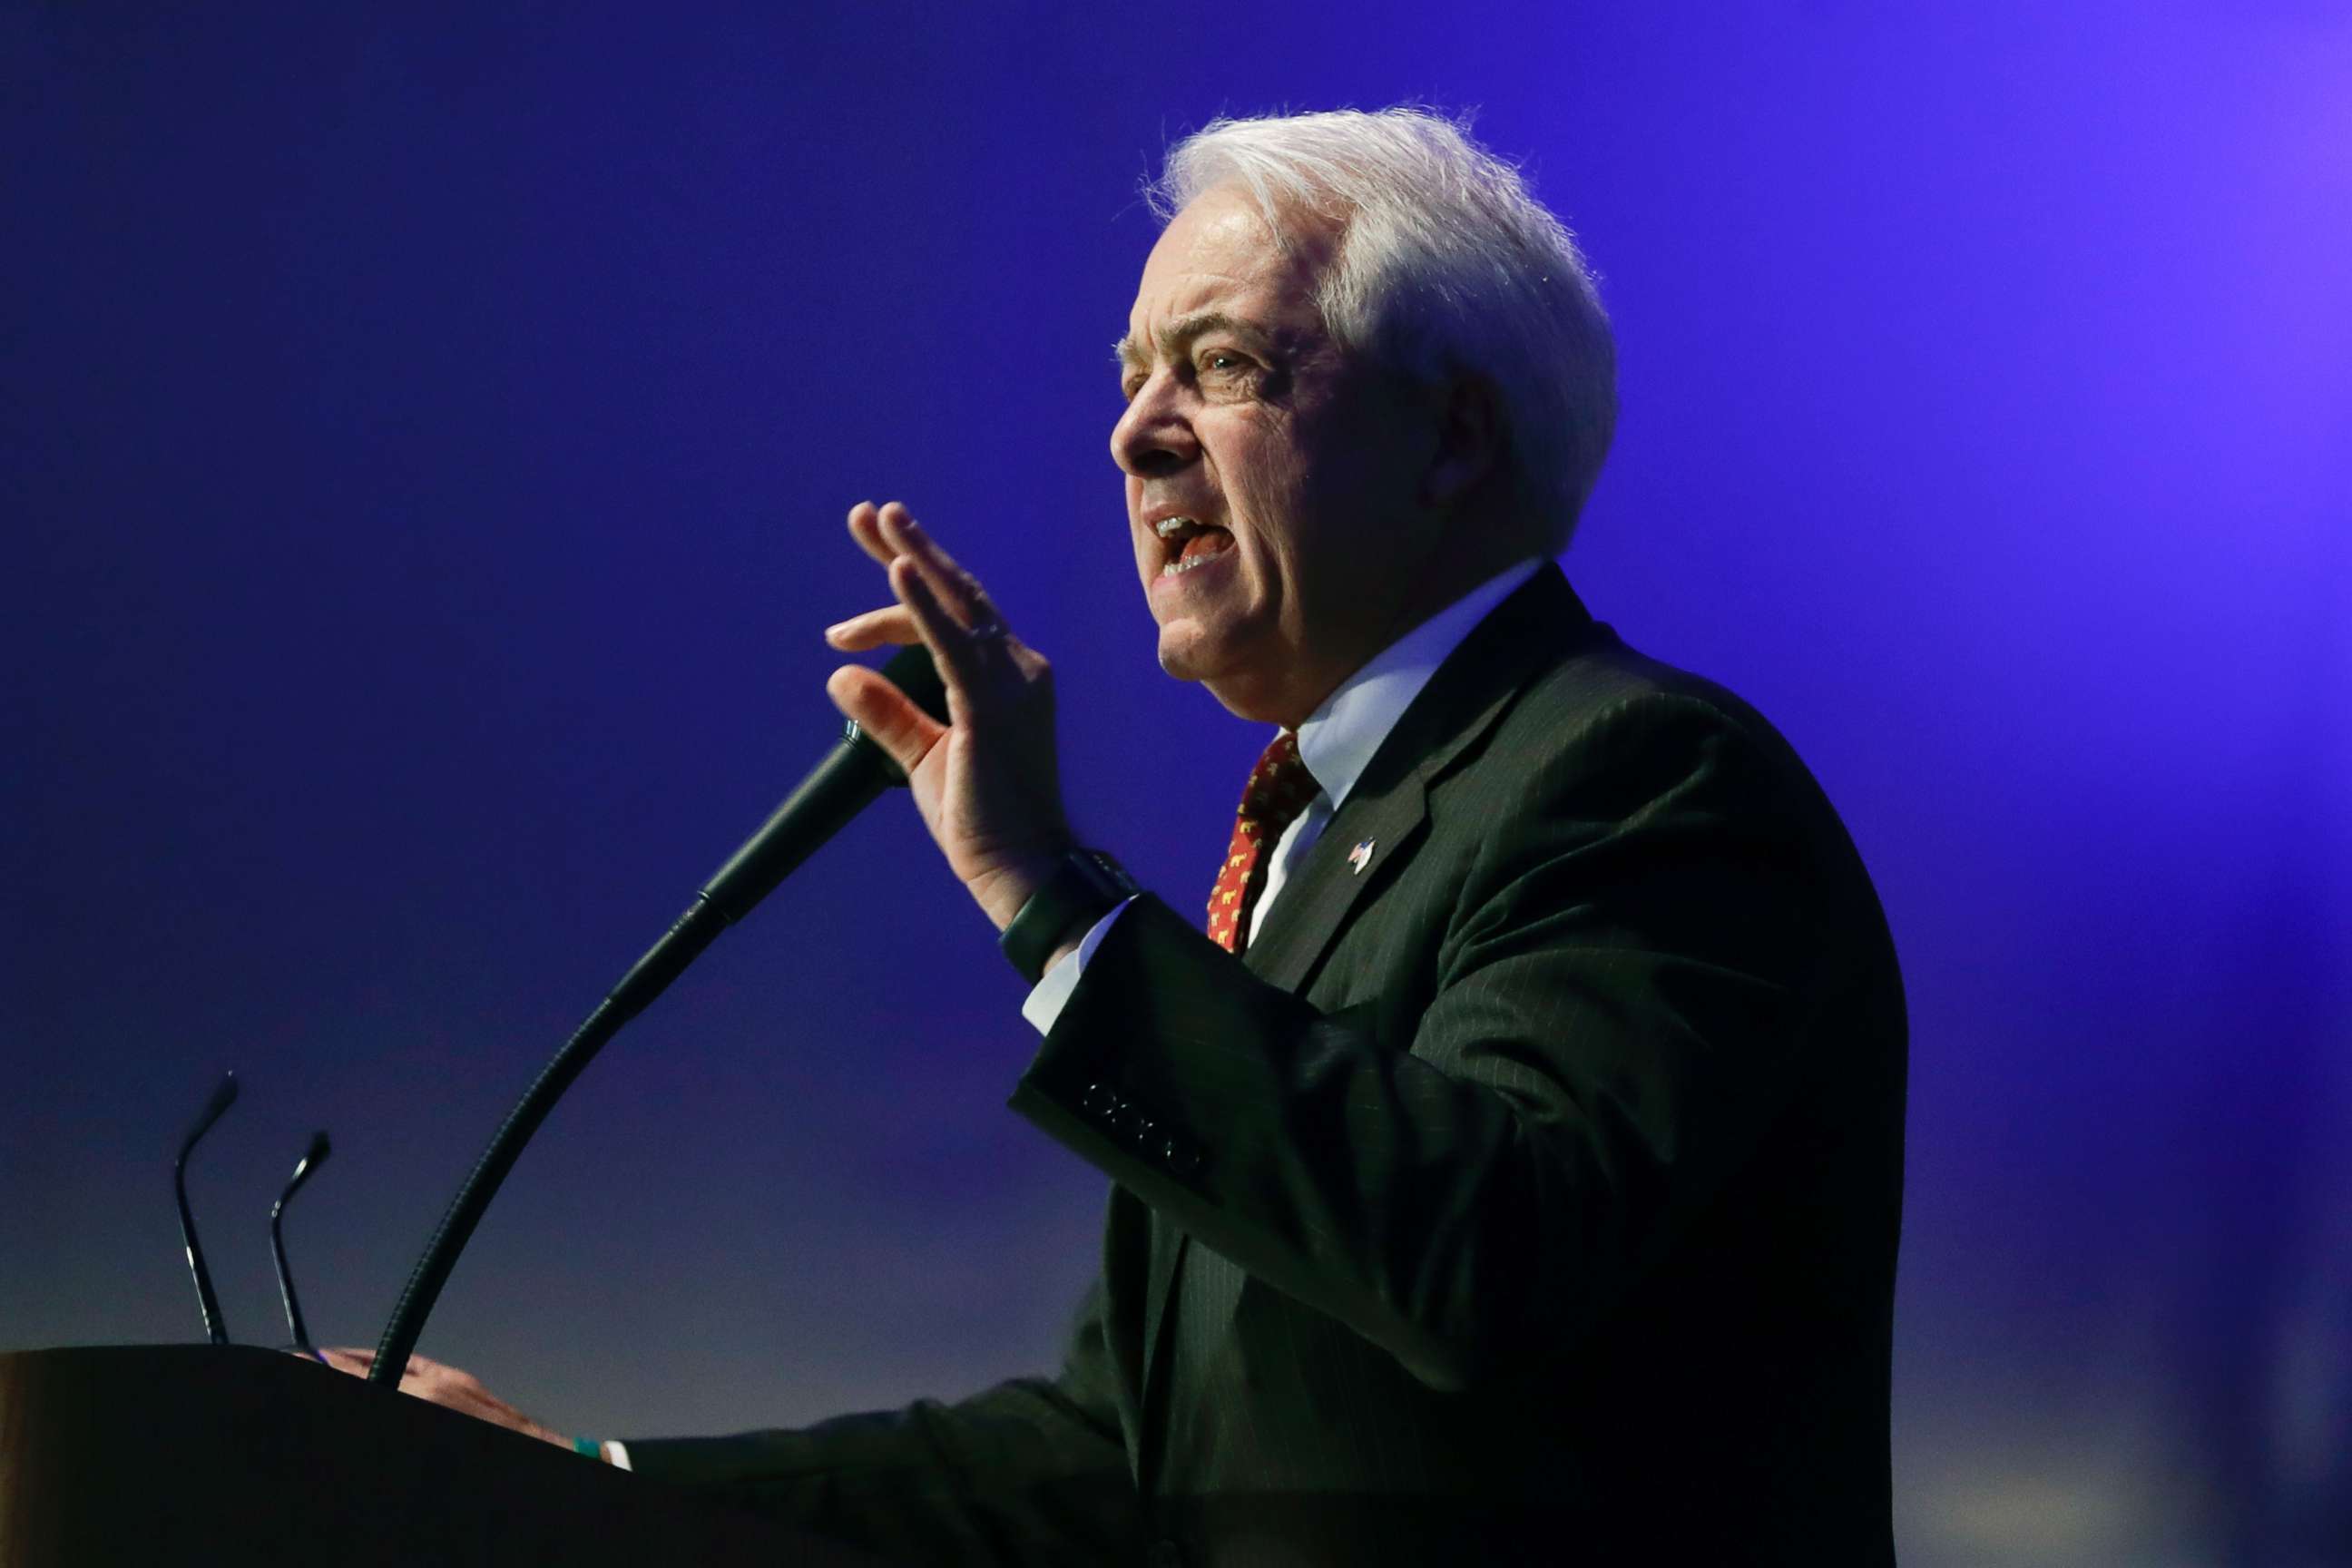 PHOTO: California gubernatorial candidate John Cox speaks during the California Republican Party convention in San Diego, Calif., May 5, 2018.